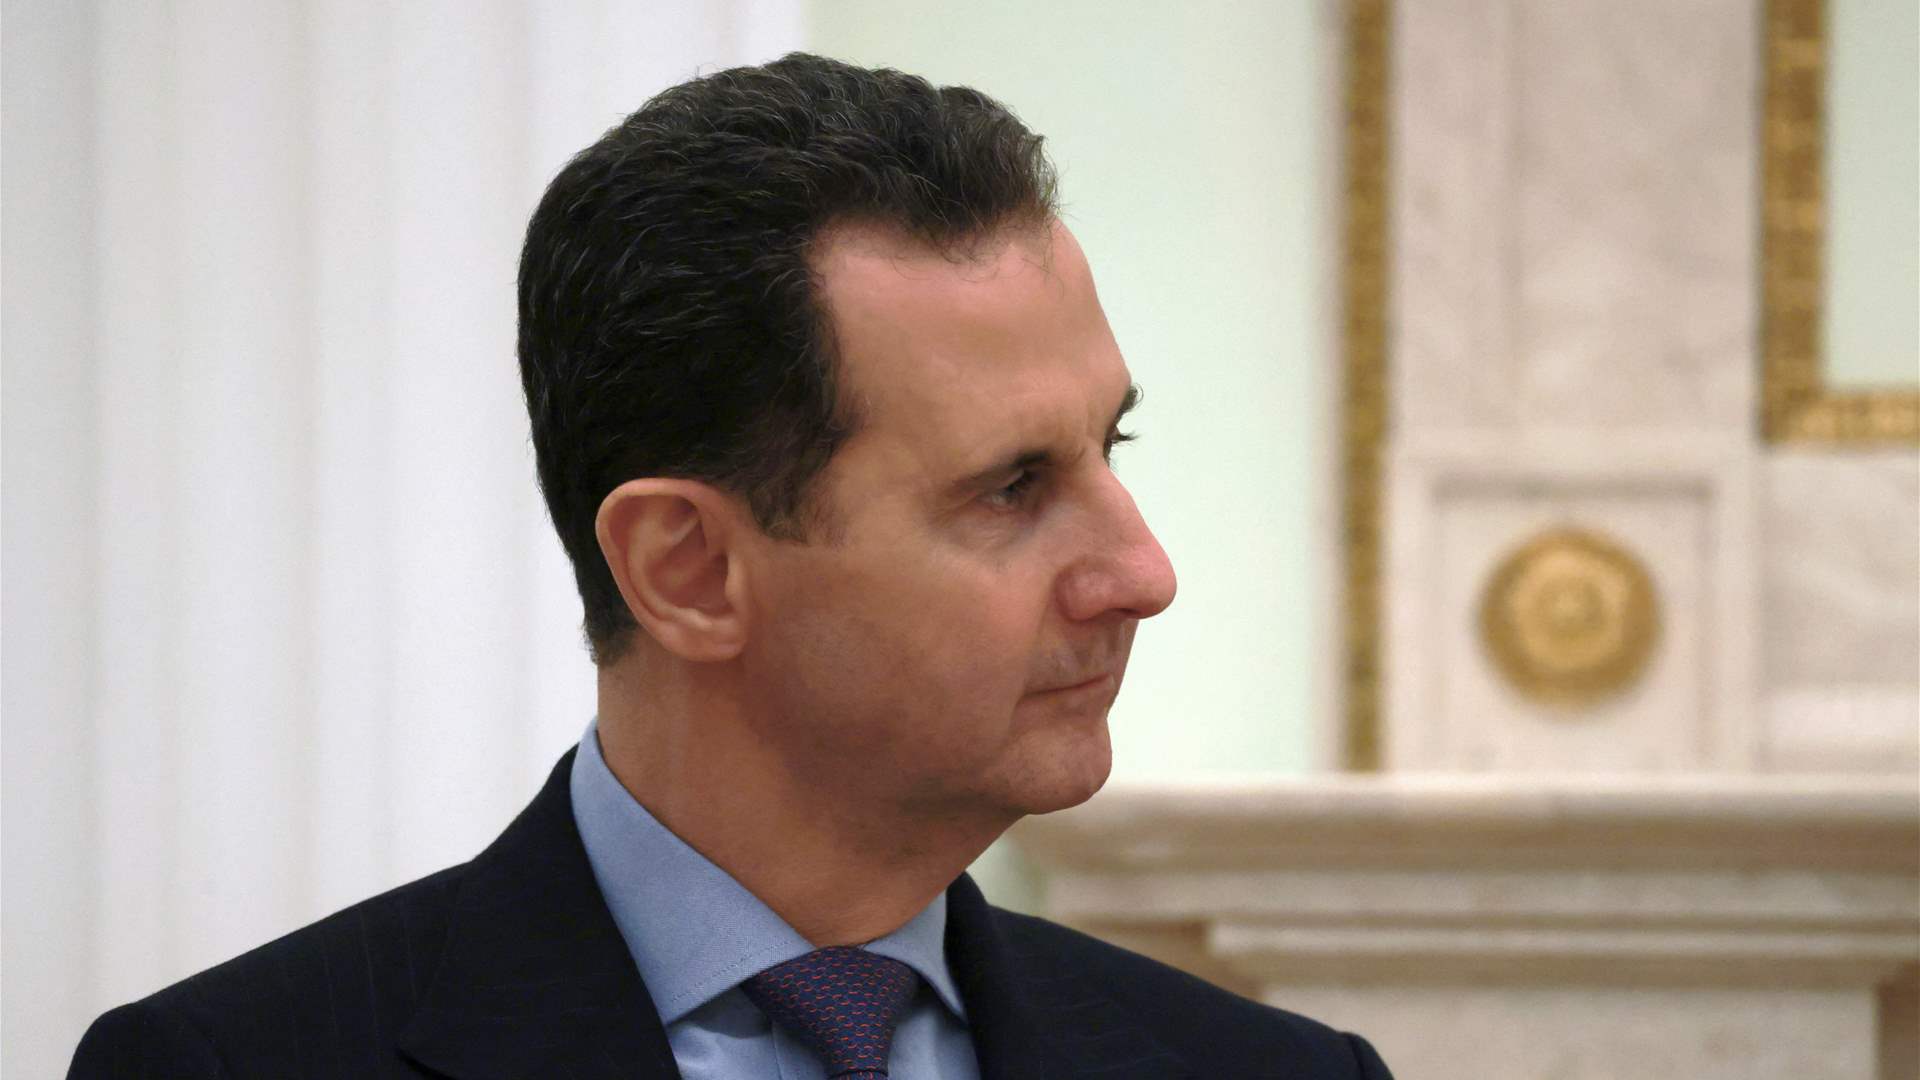 Syria is more committed to heading east: President Bashar Al-Assad 